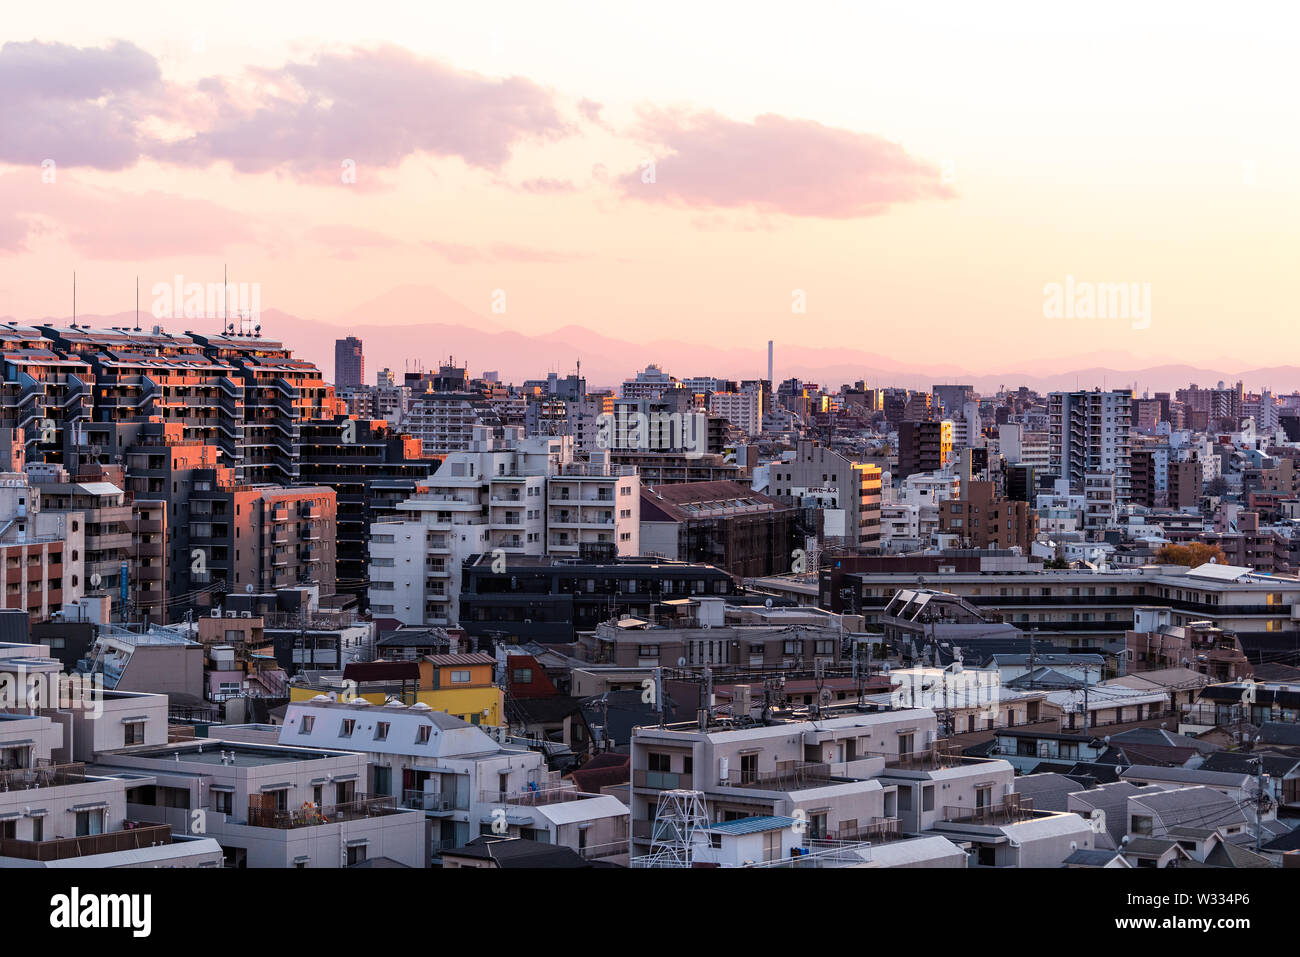 Shinjuku cityscape in Tokyo, Japan at sunset with view of Mount Fuji and golden sunlight with apartment buildings and mountains Stock Photo